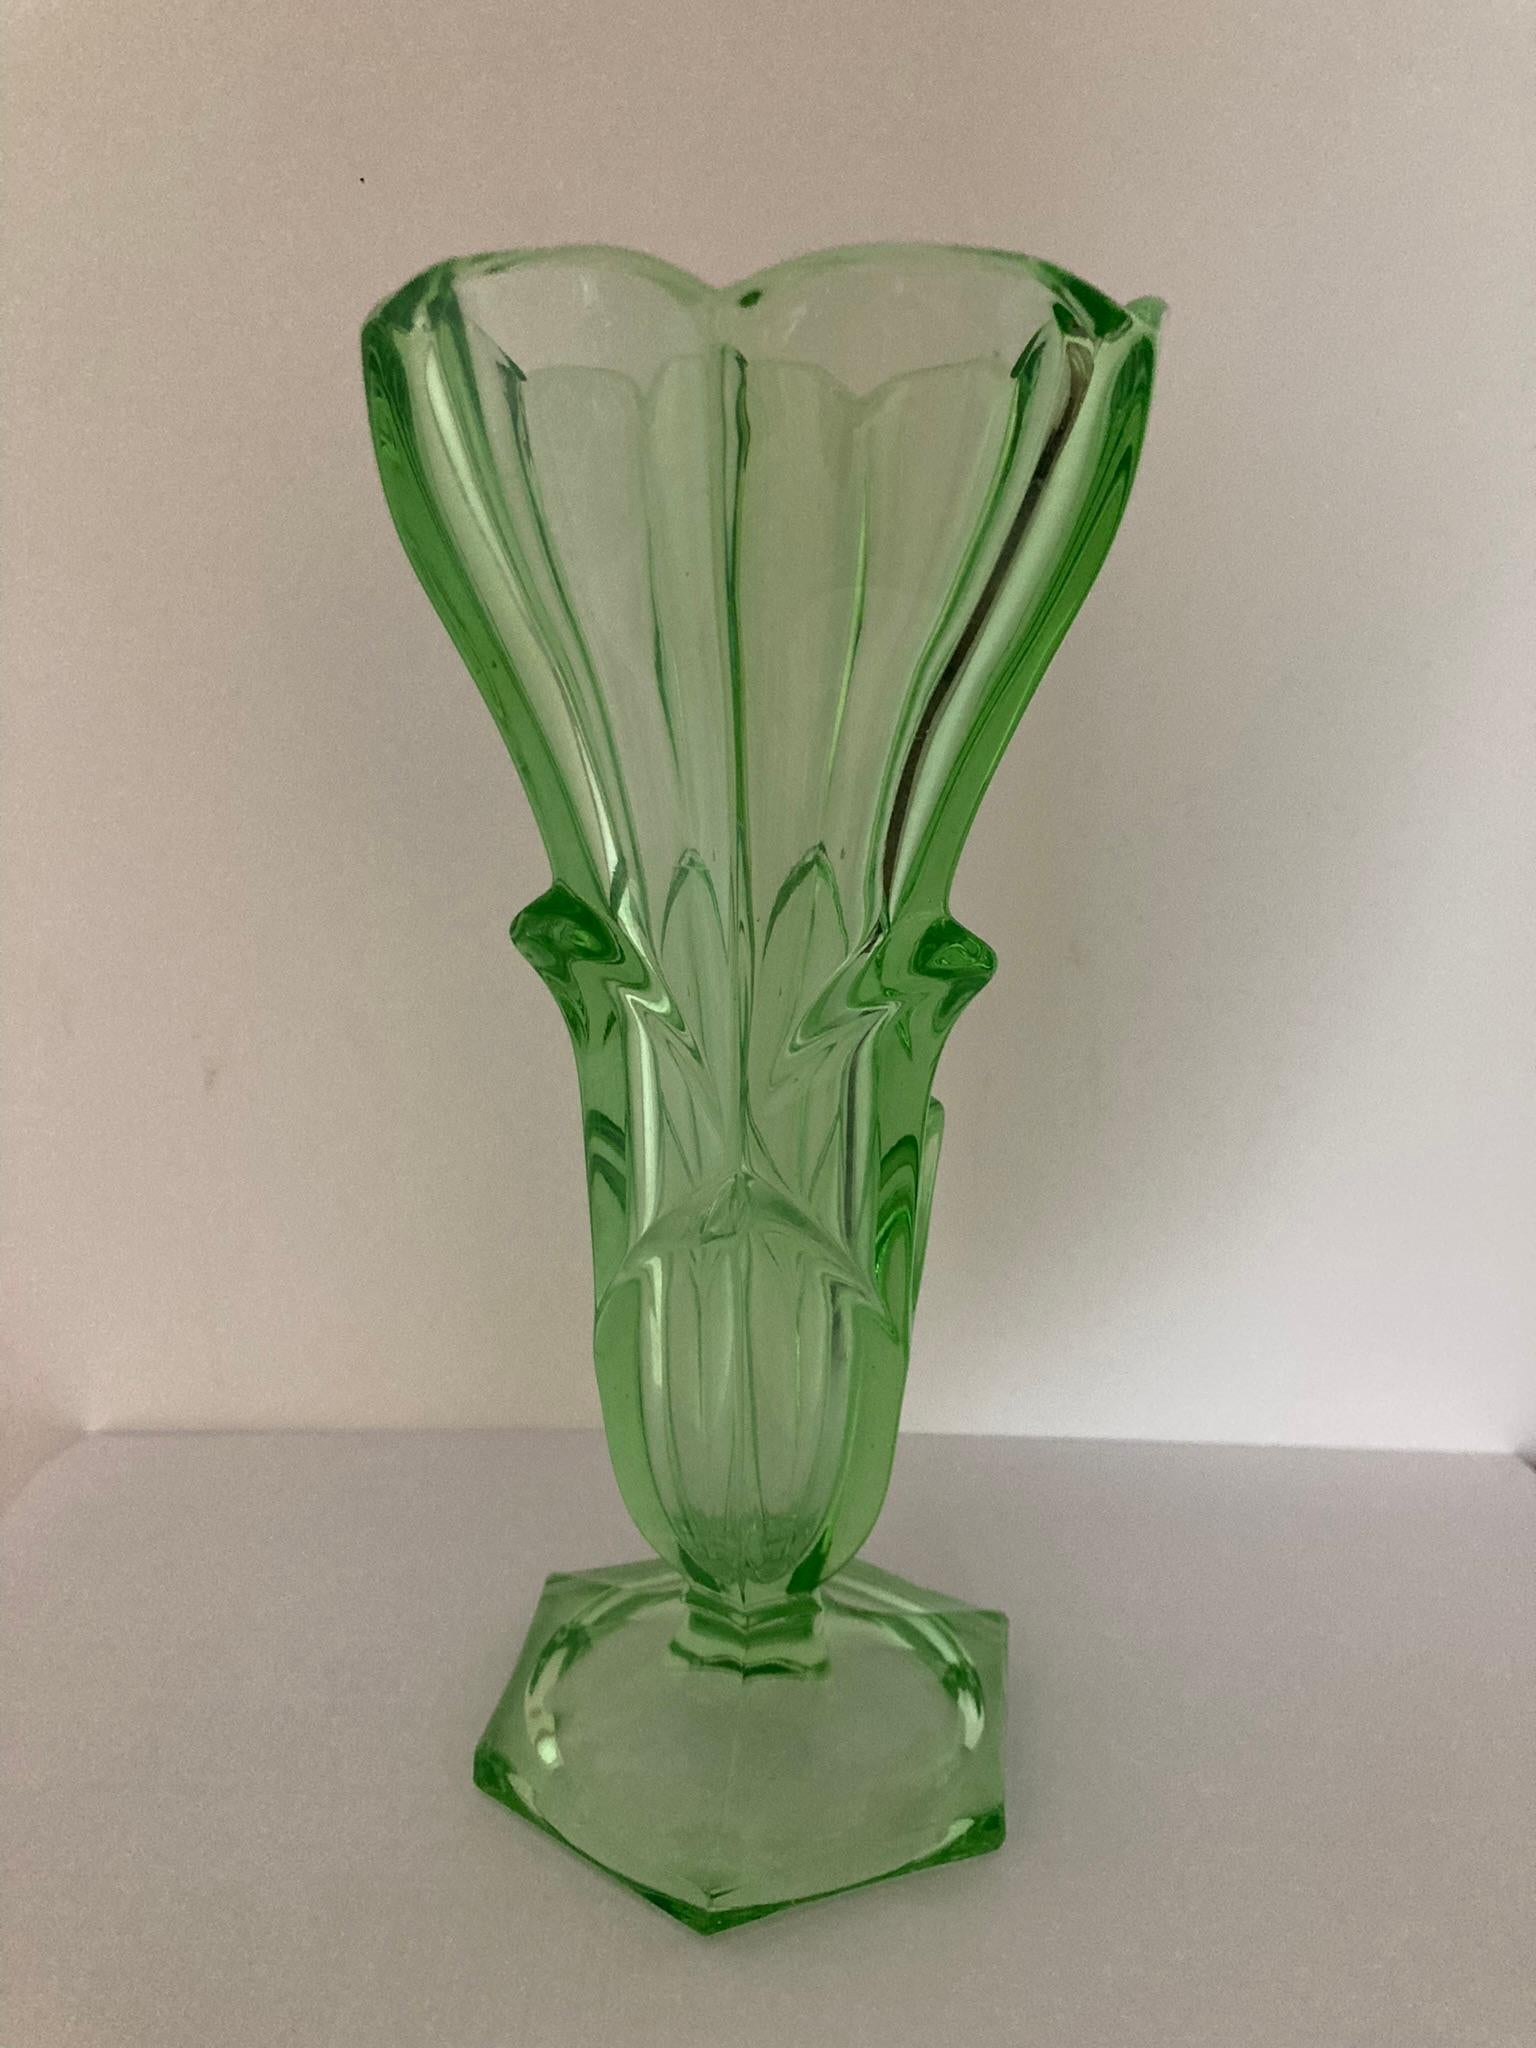 An exquisite green uranium glass vase with a captivating flower design. Crafted with precision, this elegant vase adds a touch of sophistication to any space. The vibrant green hue complements the intricate floral pattern, creating a stunning visual